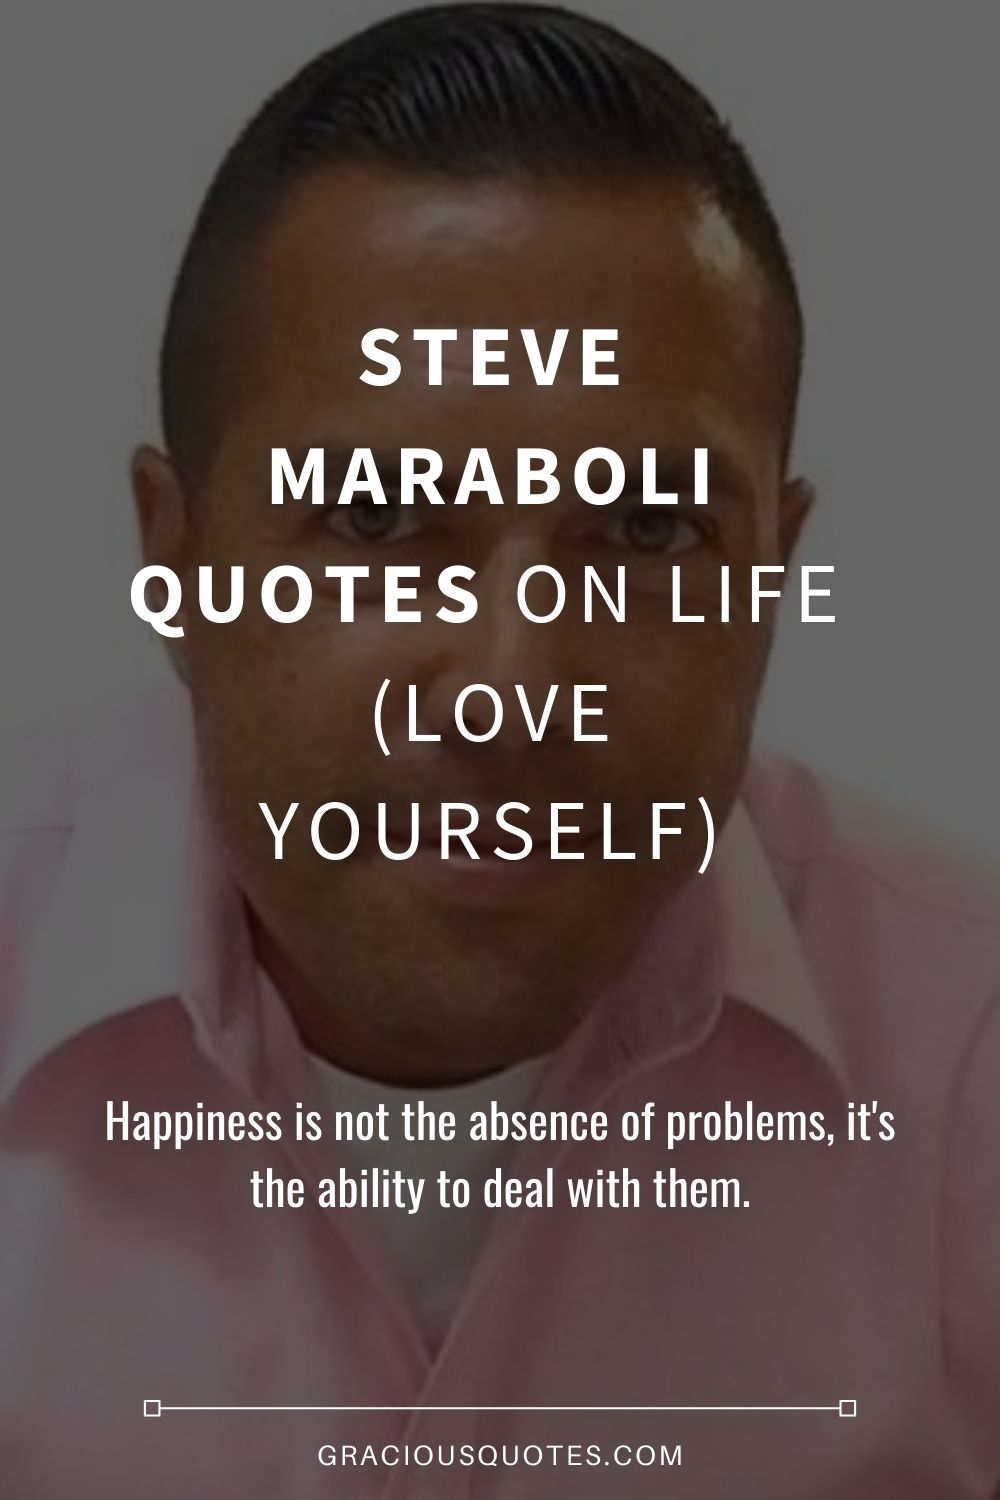 Steve Maraboli Quotes on Life (LOVE YOURSELF) - Gracious Quotes